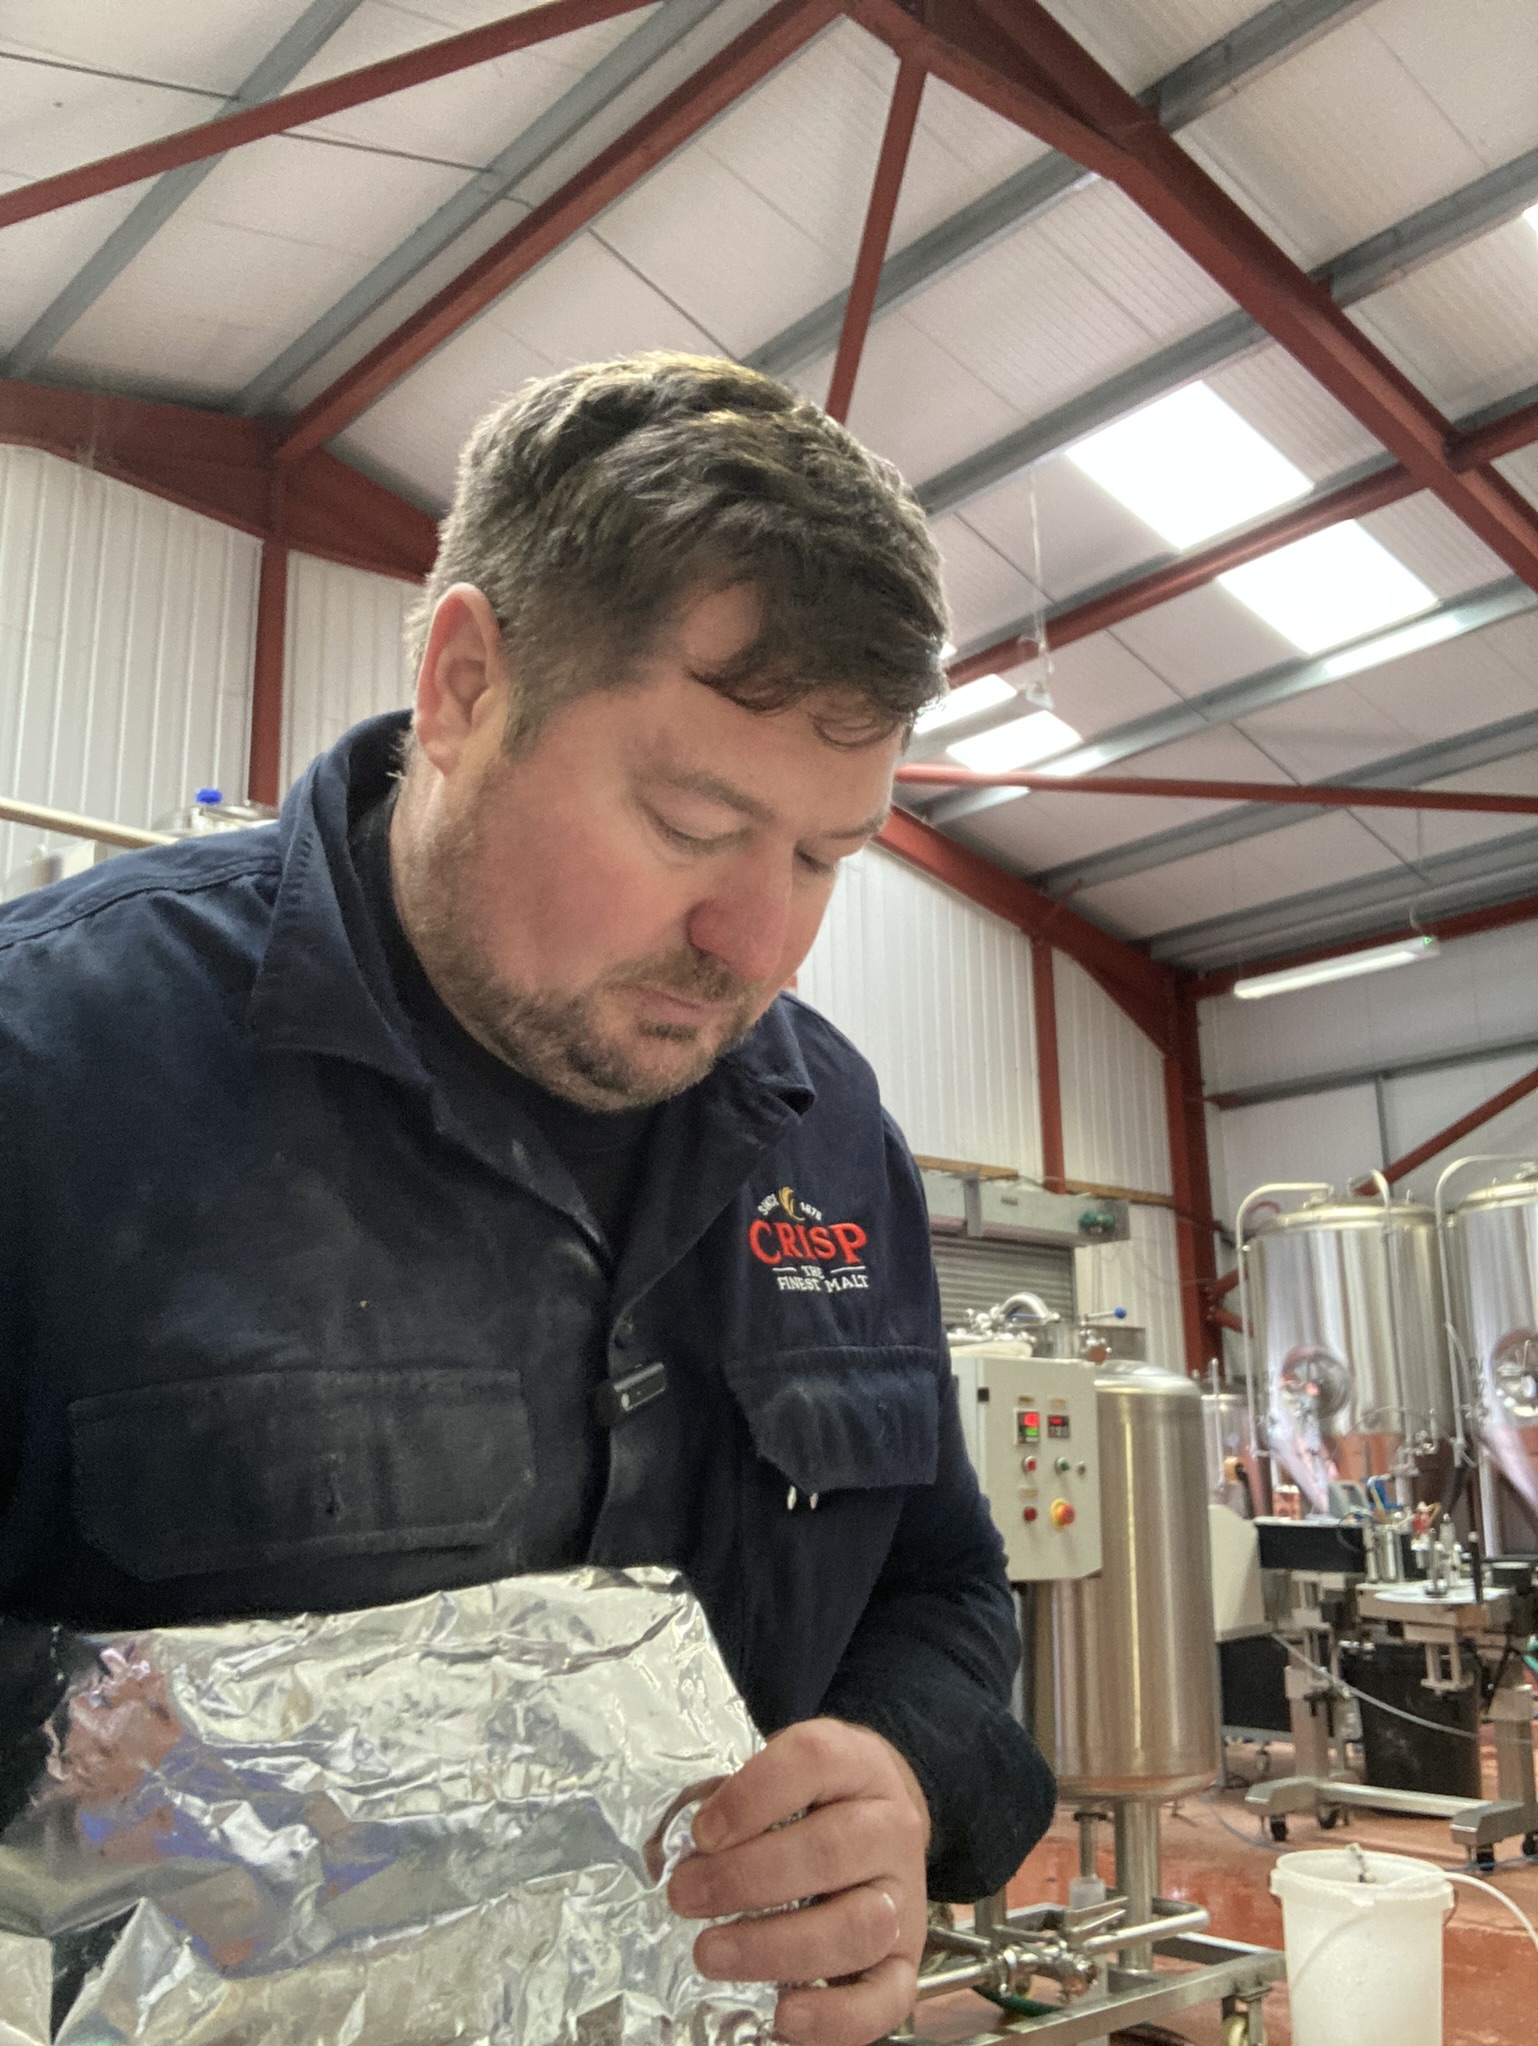 Mike the Craft Sales Brewing Manager at Crisp helps on the beer collab at RedWillow Brewery in Cheshire